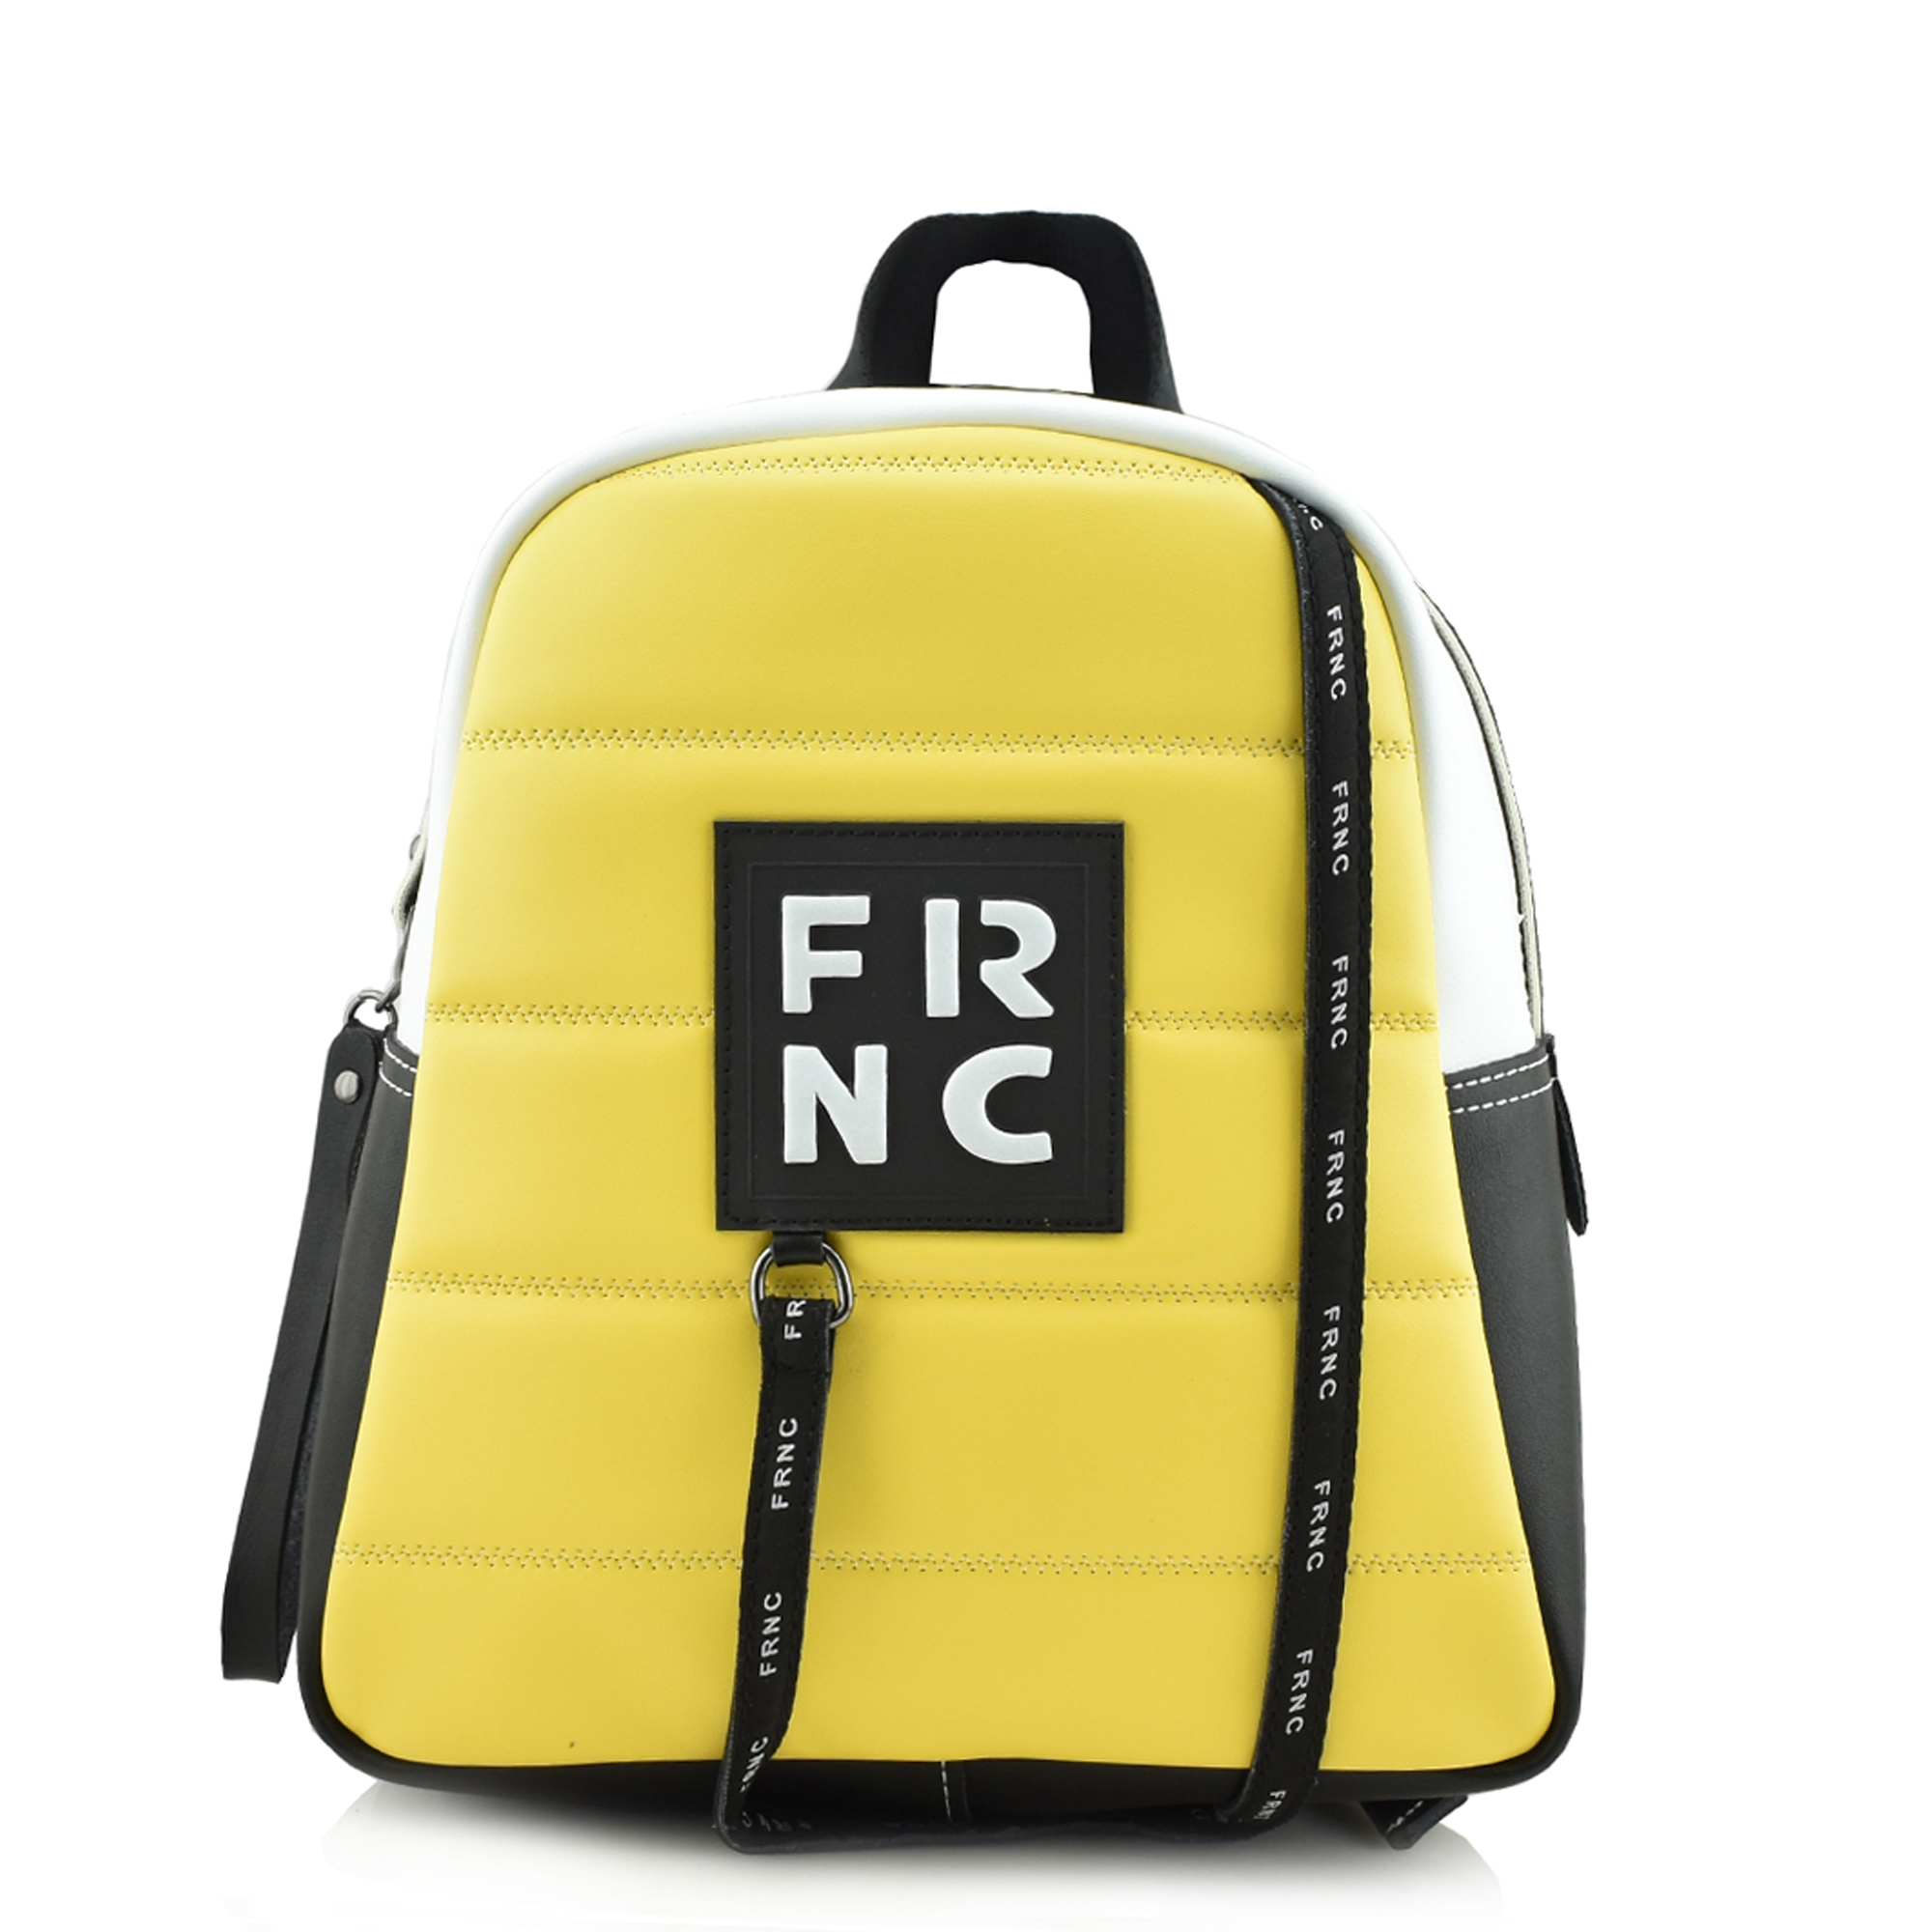 FRNC - FRANCESCO CLASSIC DOUBLE COLOR BACKPACK - 2132 YELLOW